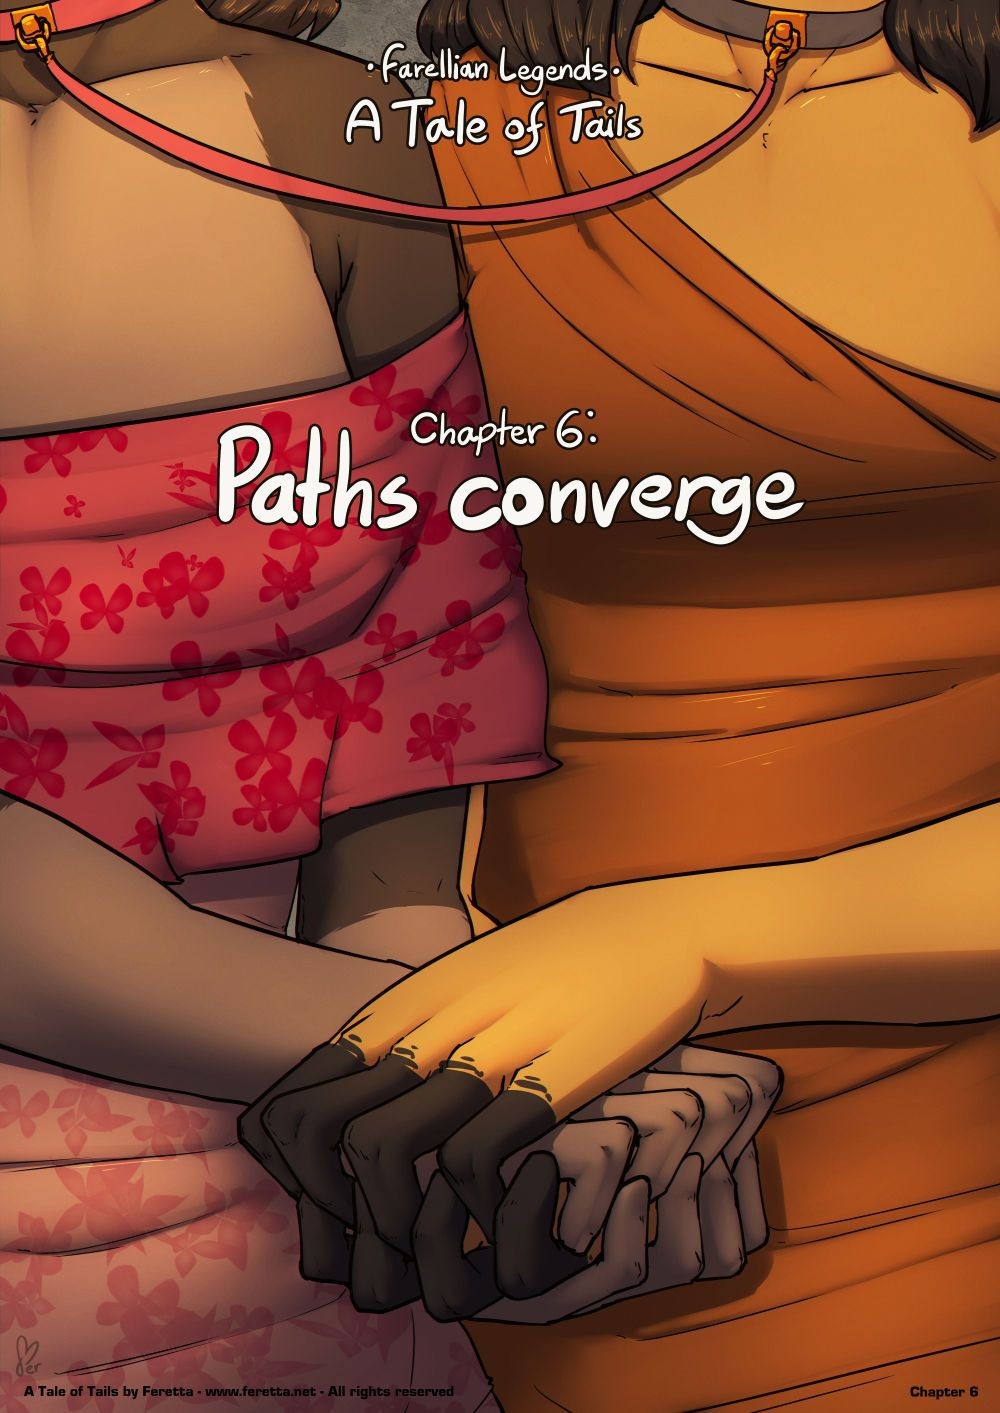 Hunks [Feretta] A Tale Of Tails: Chapter 6 - Paths Converge (ongoing) And